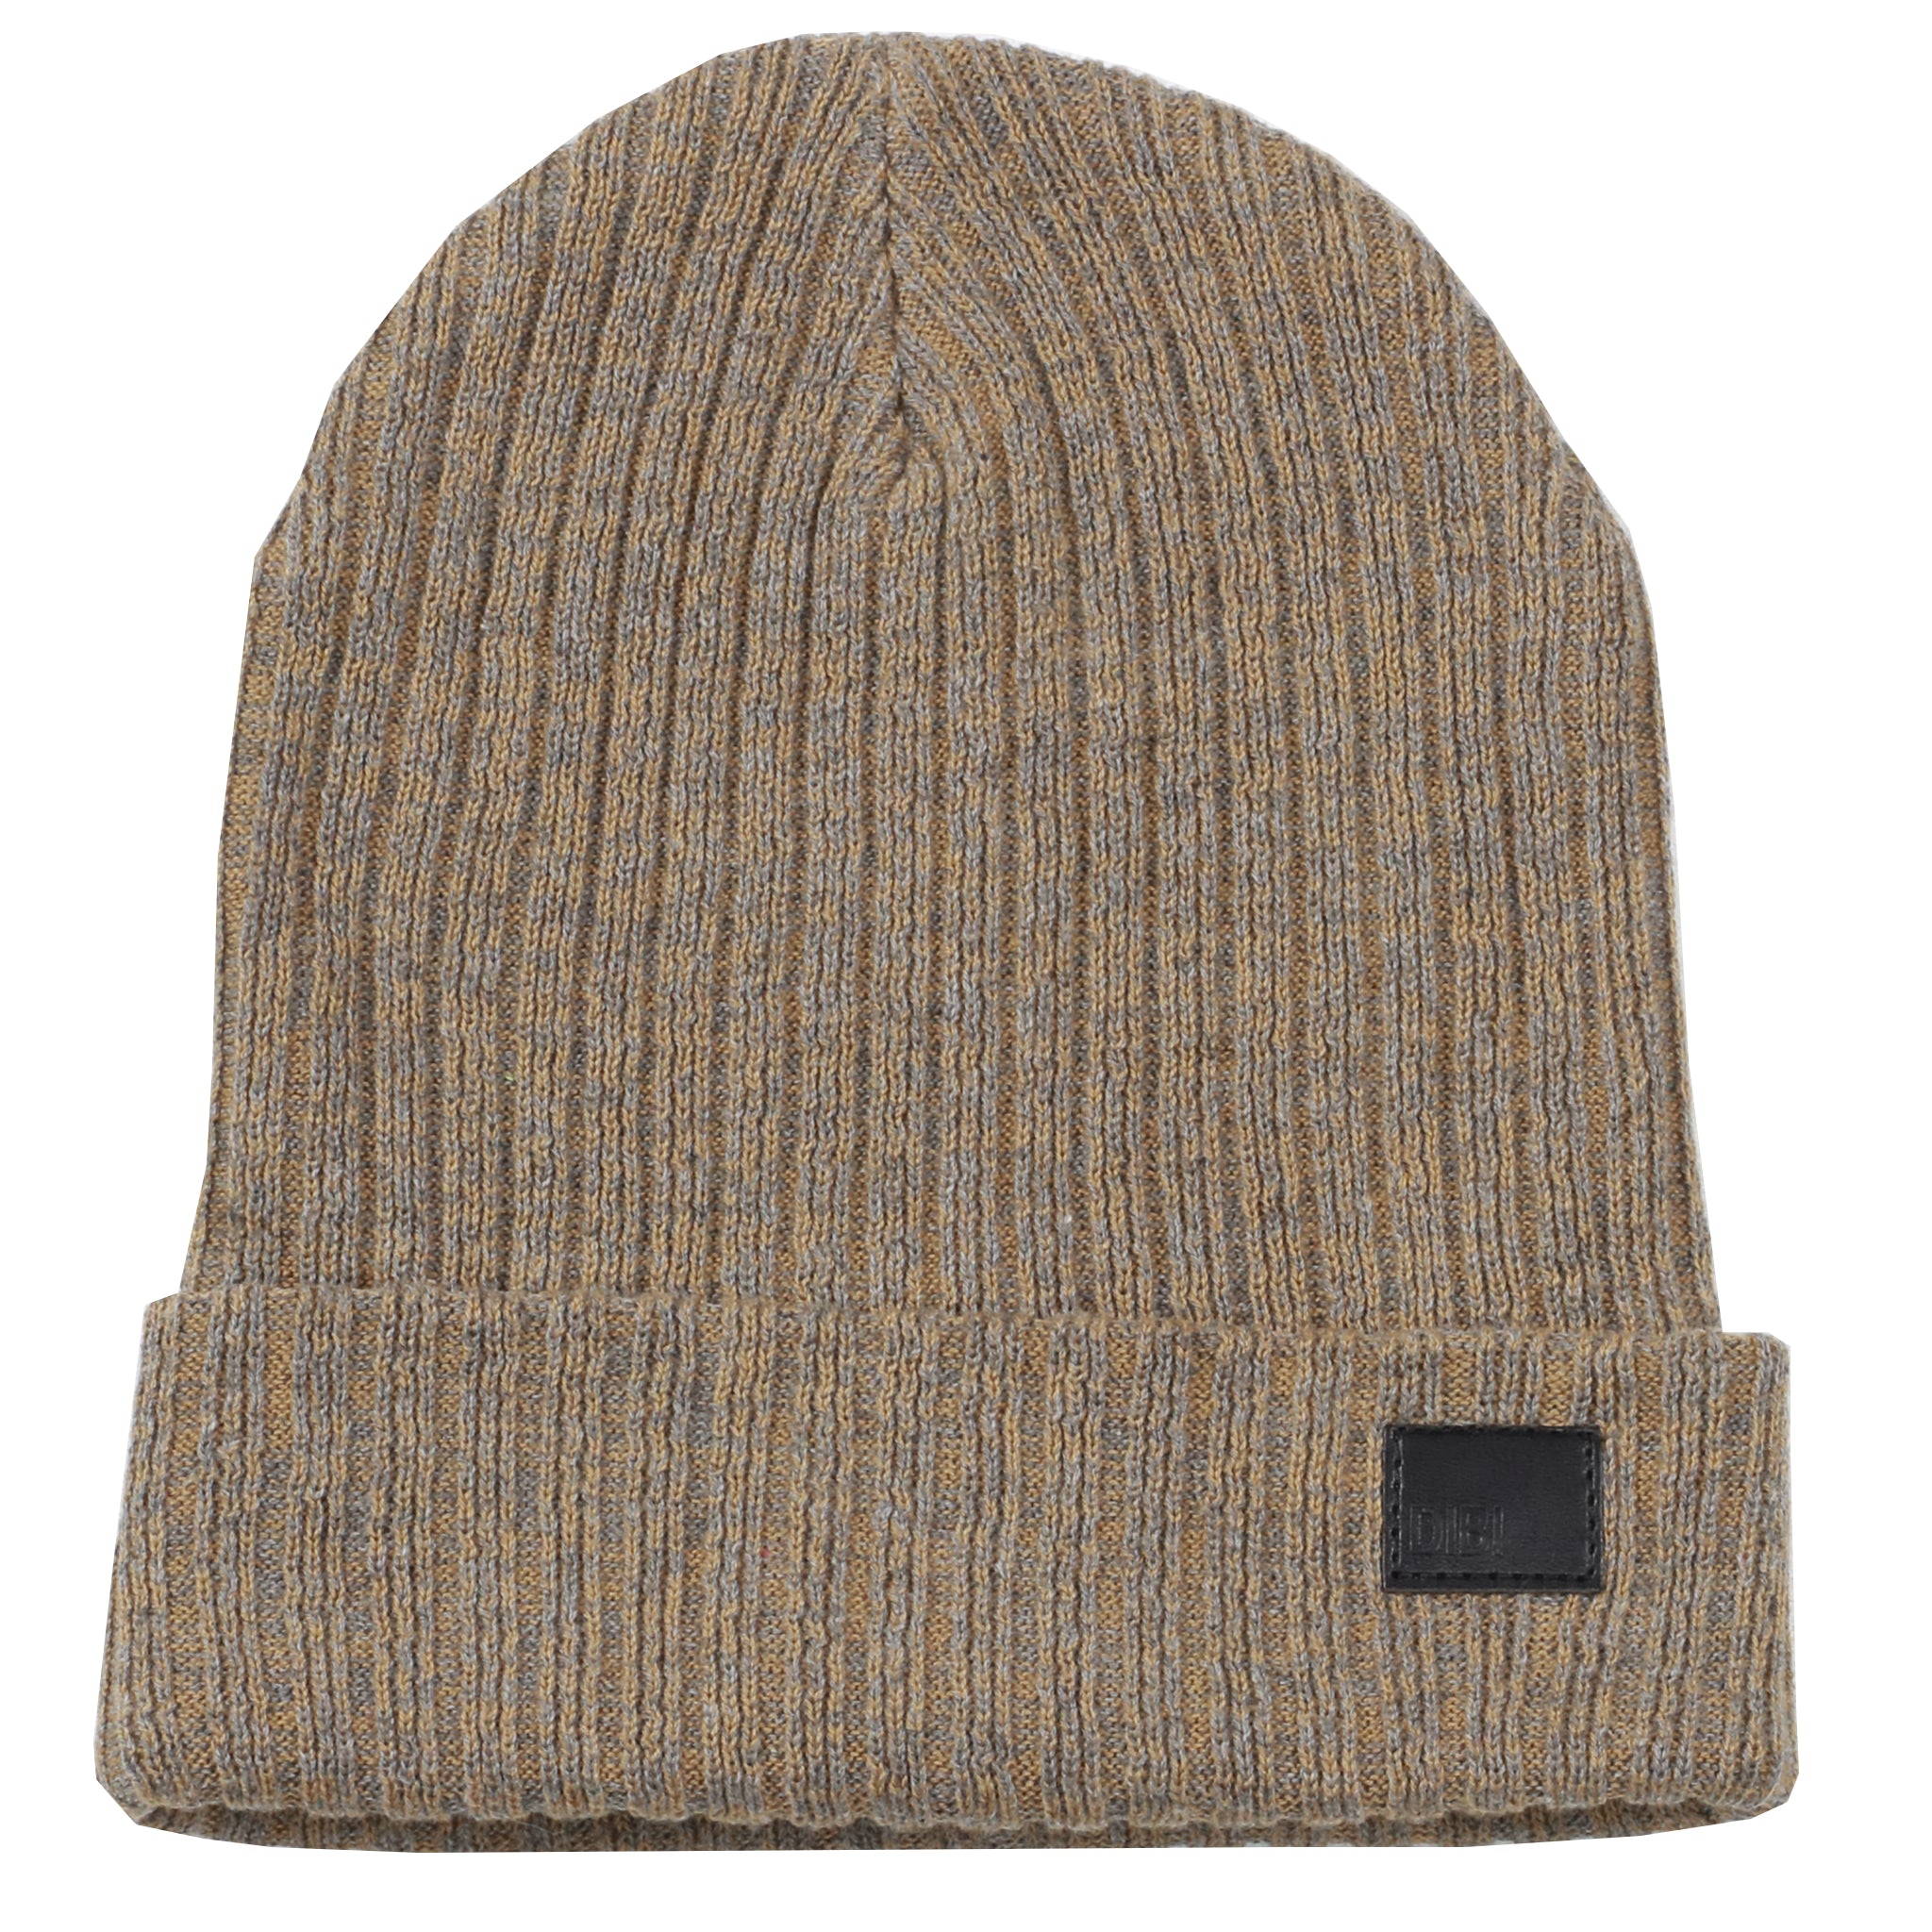 Brown & Charcoal Cotton Beanie from DIBI